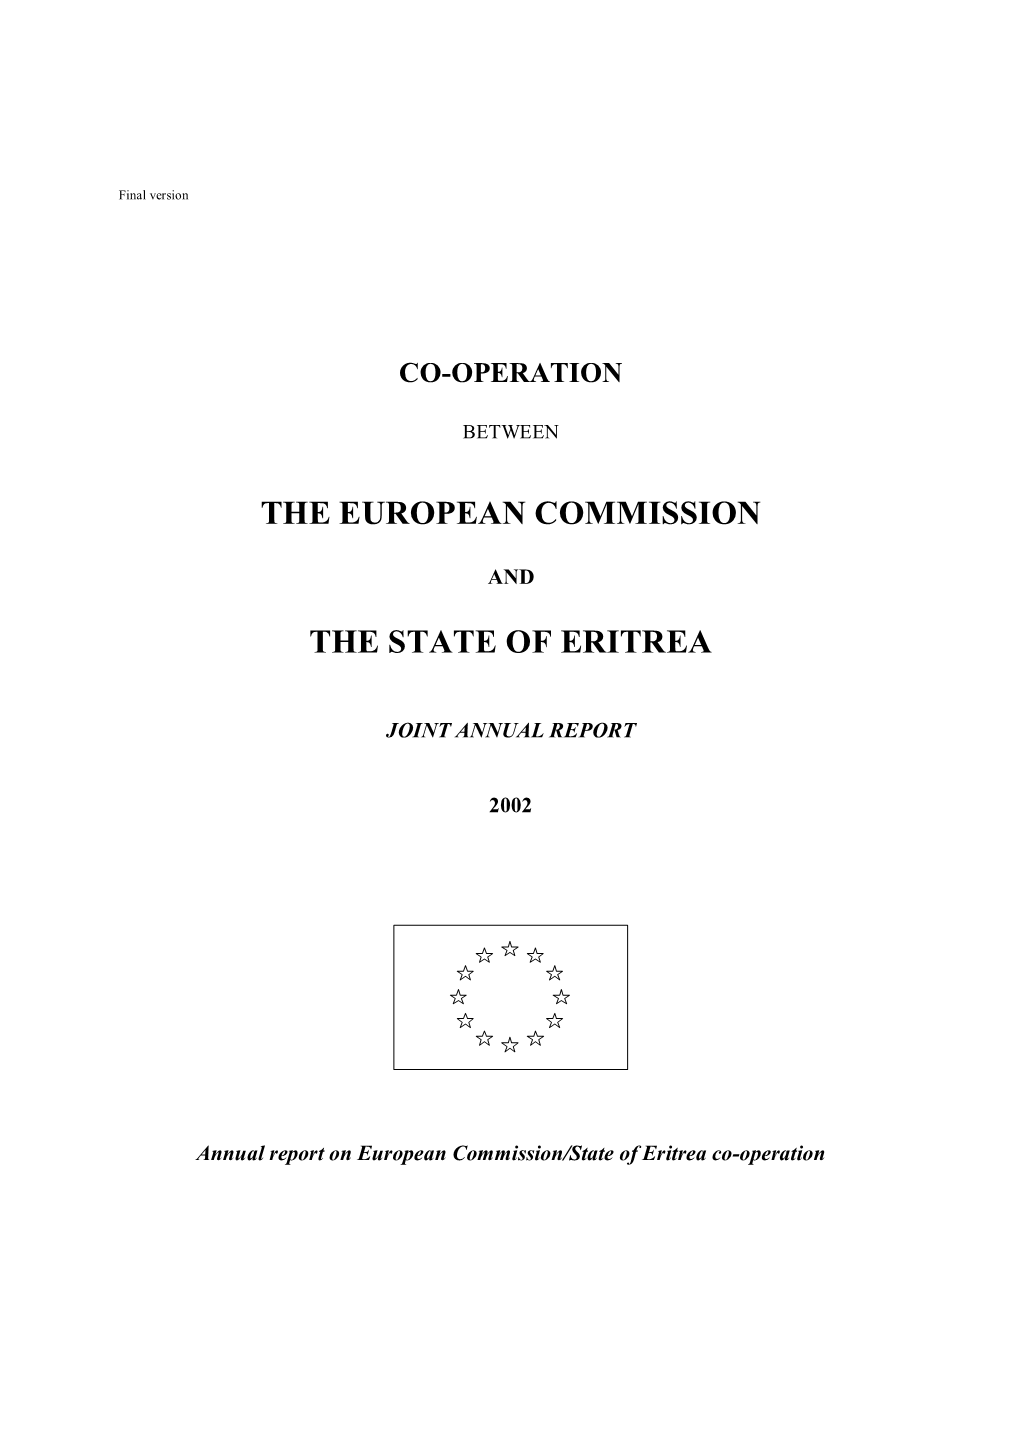 The European Commission the State of Eritrea